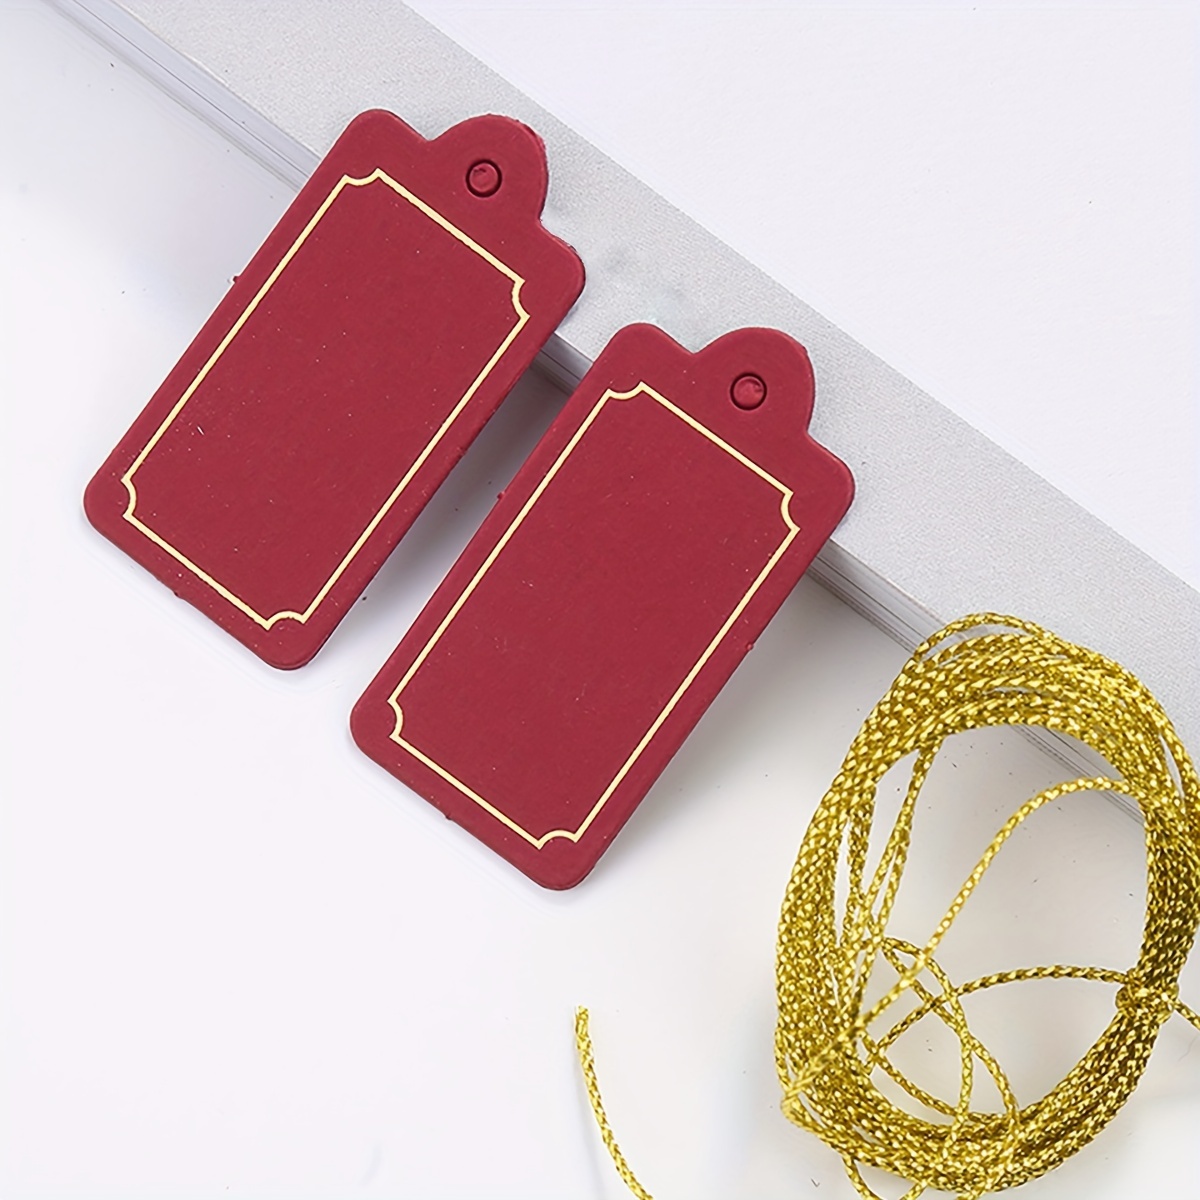 Buy Red Hand Punched Tags for Labeling, Scrapbooking, Gifts, Thank You,  Price Tags, Red String Tags, Valentine's Day, Christmas Tags, Set of 30  Online in India 